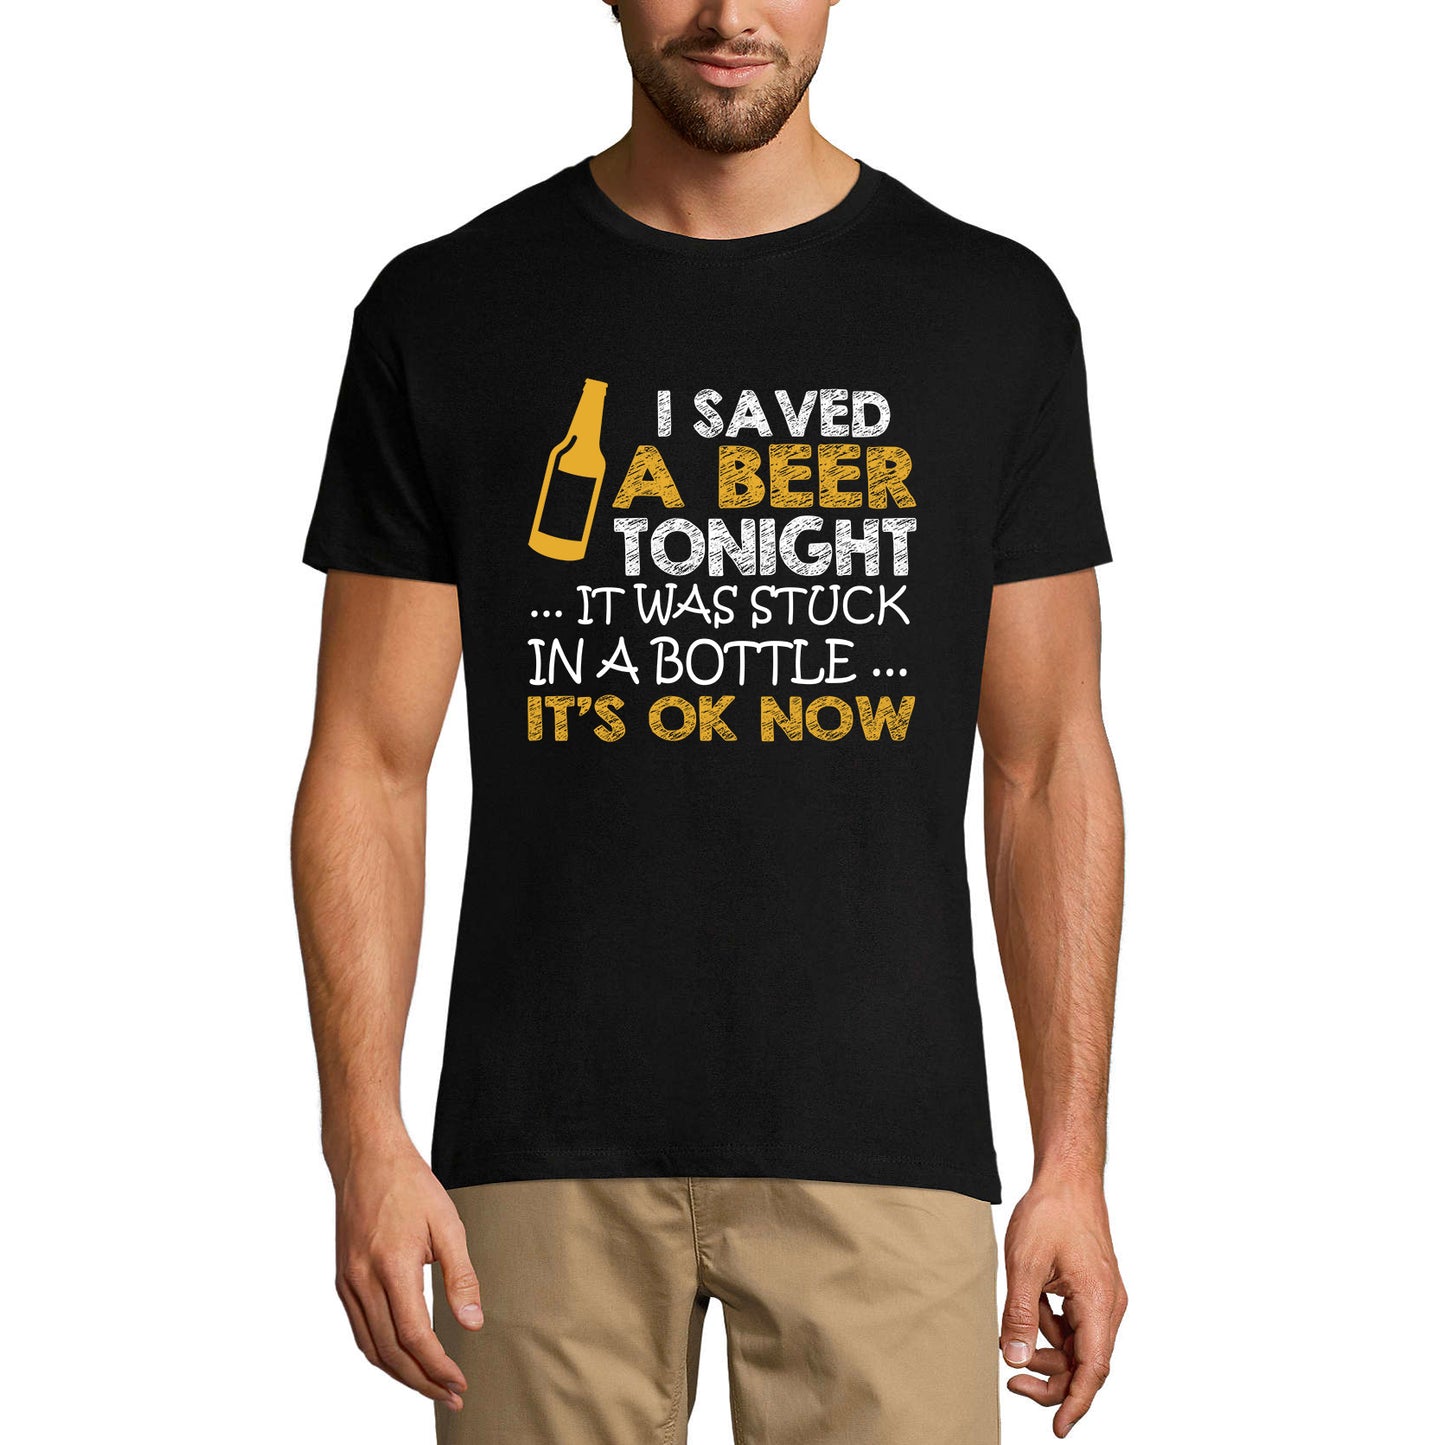 ULTRABASIC Men's T-Shirt I Saved a Beer Tonight It Was Stuck In Bottle - Funny Saying Beer Lover Tee Shirt